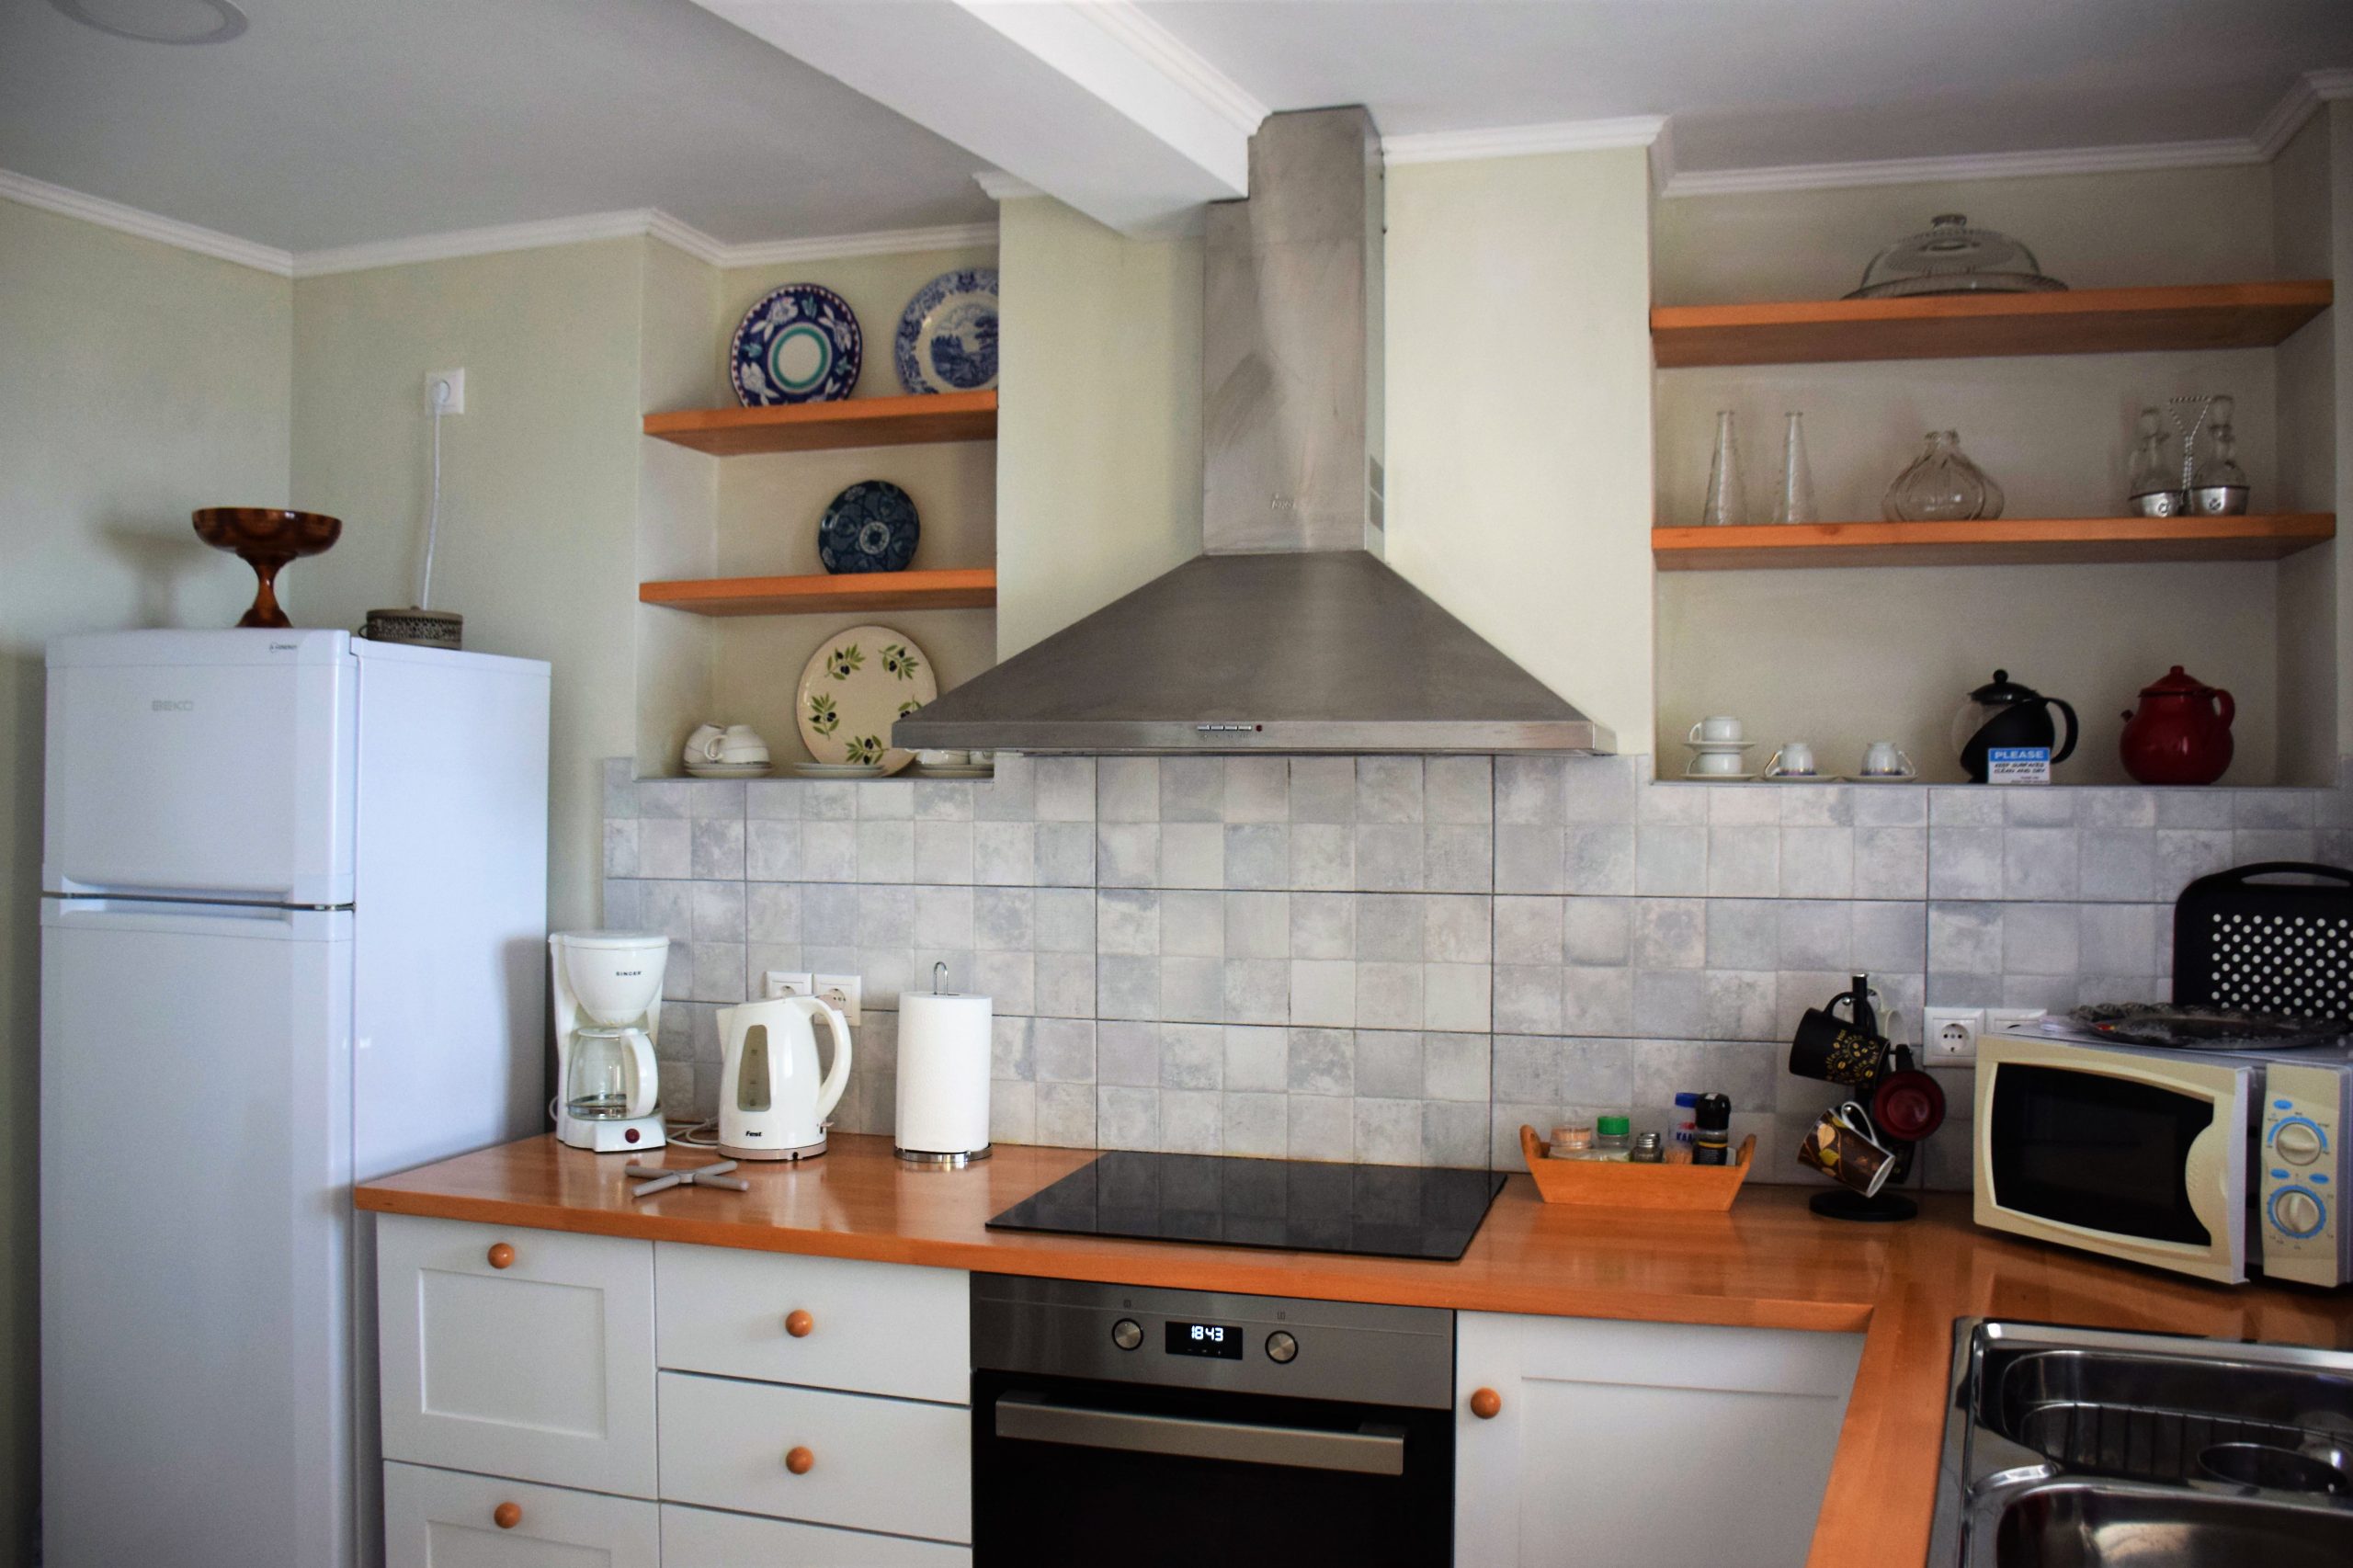 Kitchen of house to rent in Ithaca Greece, Kioni